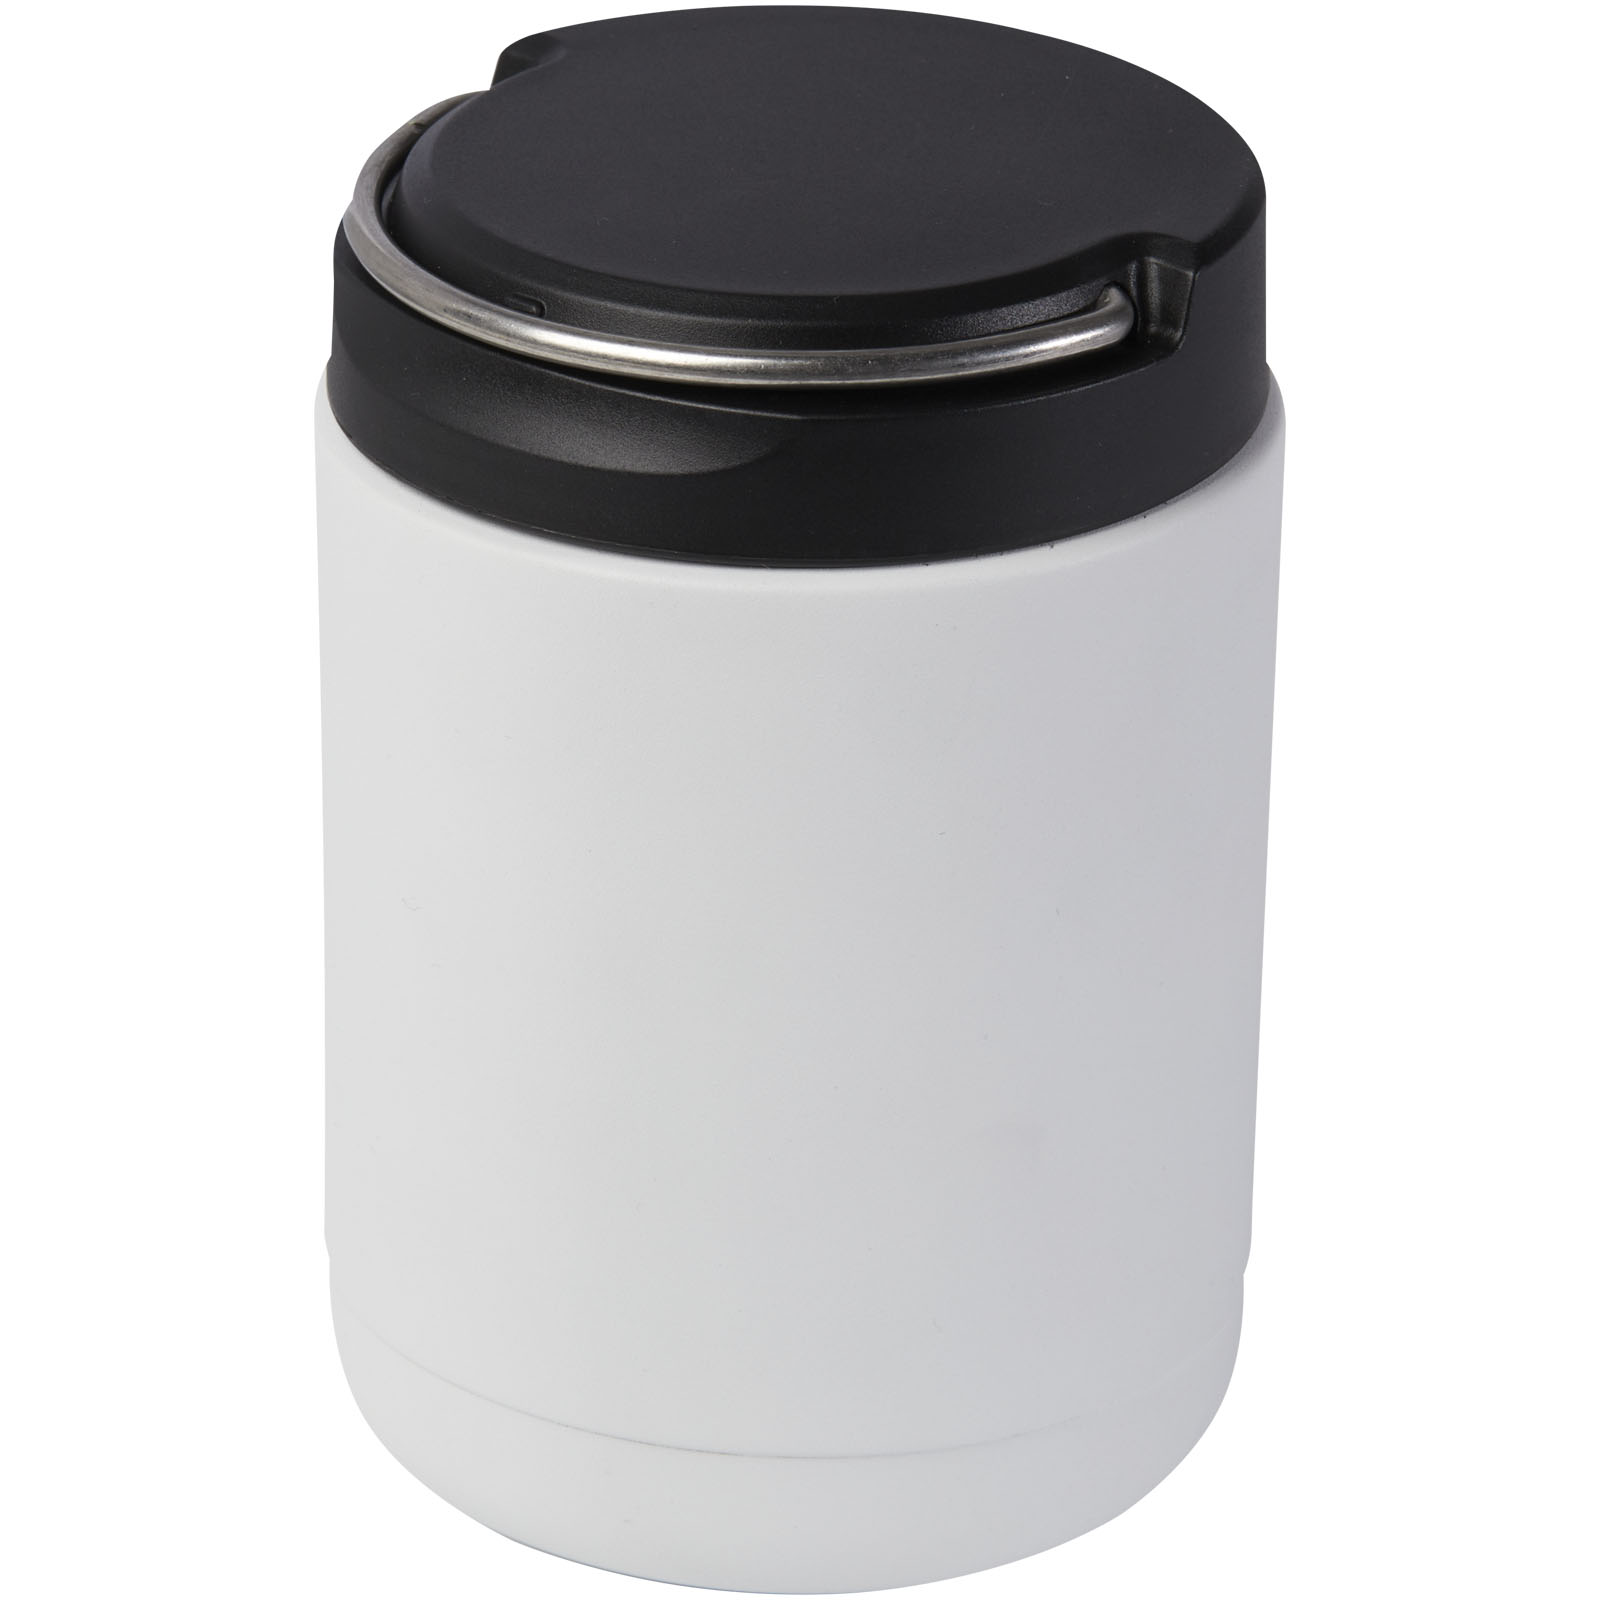 Home & Kitchen - Doveron 500 ml recycled stainless steel insulated lunch pot